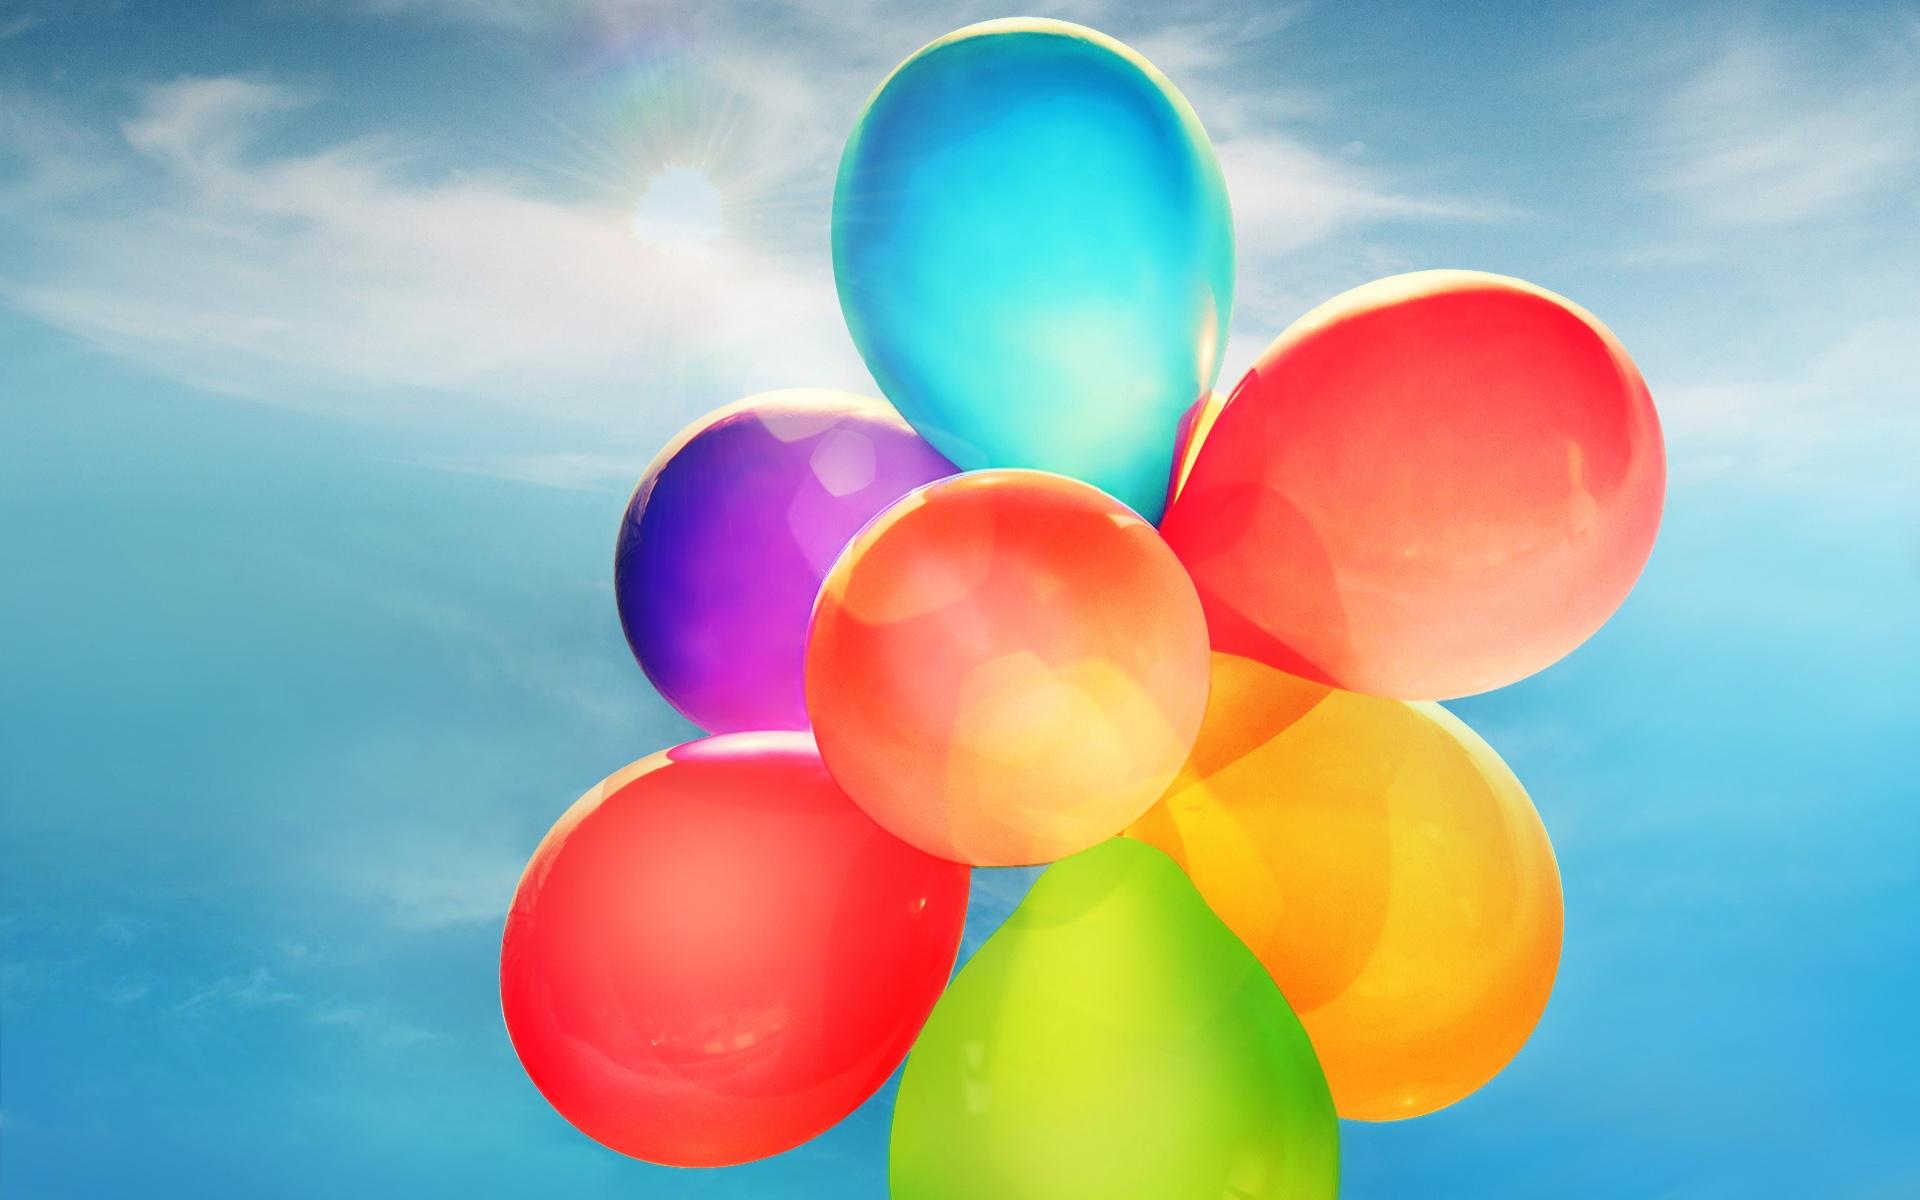 Colorful Balloons Wallpaper in jpg format for free download